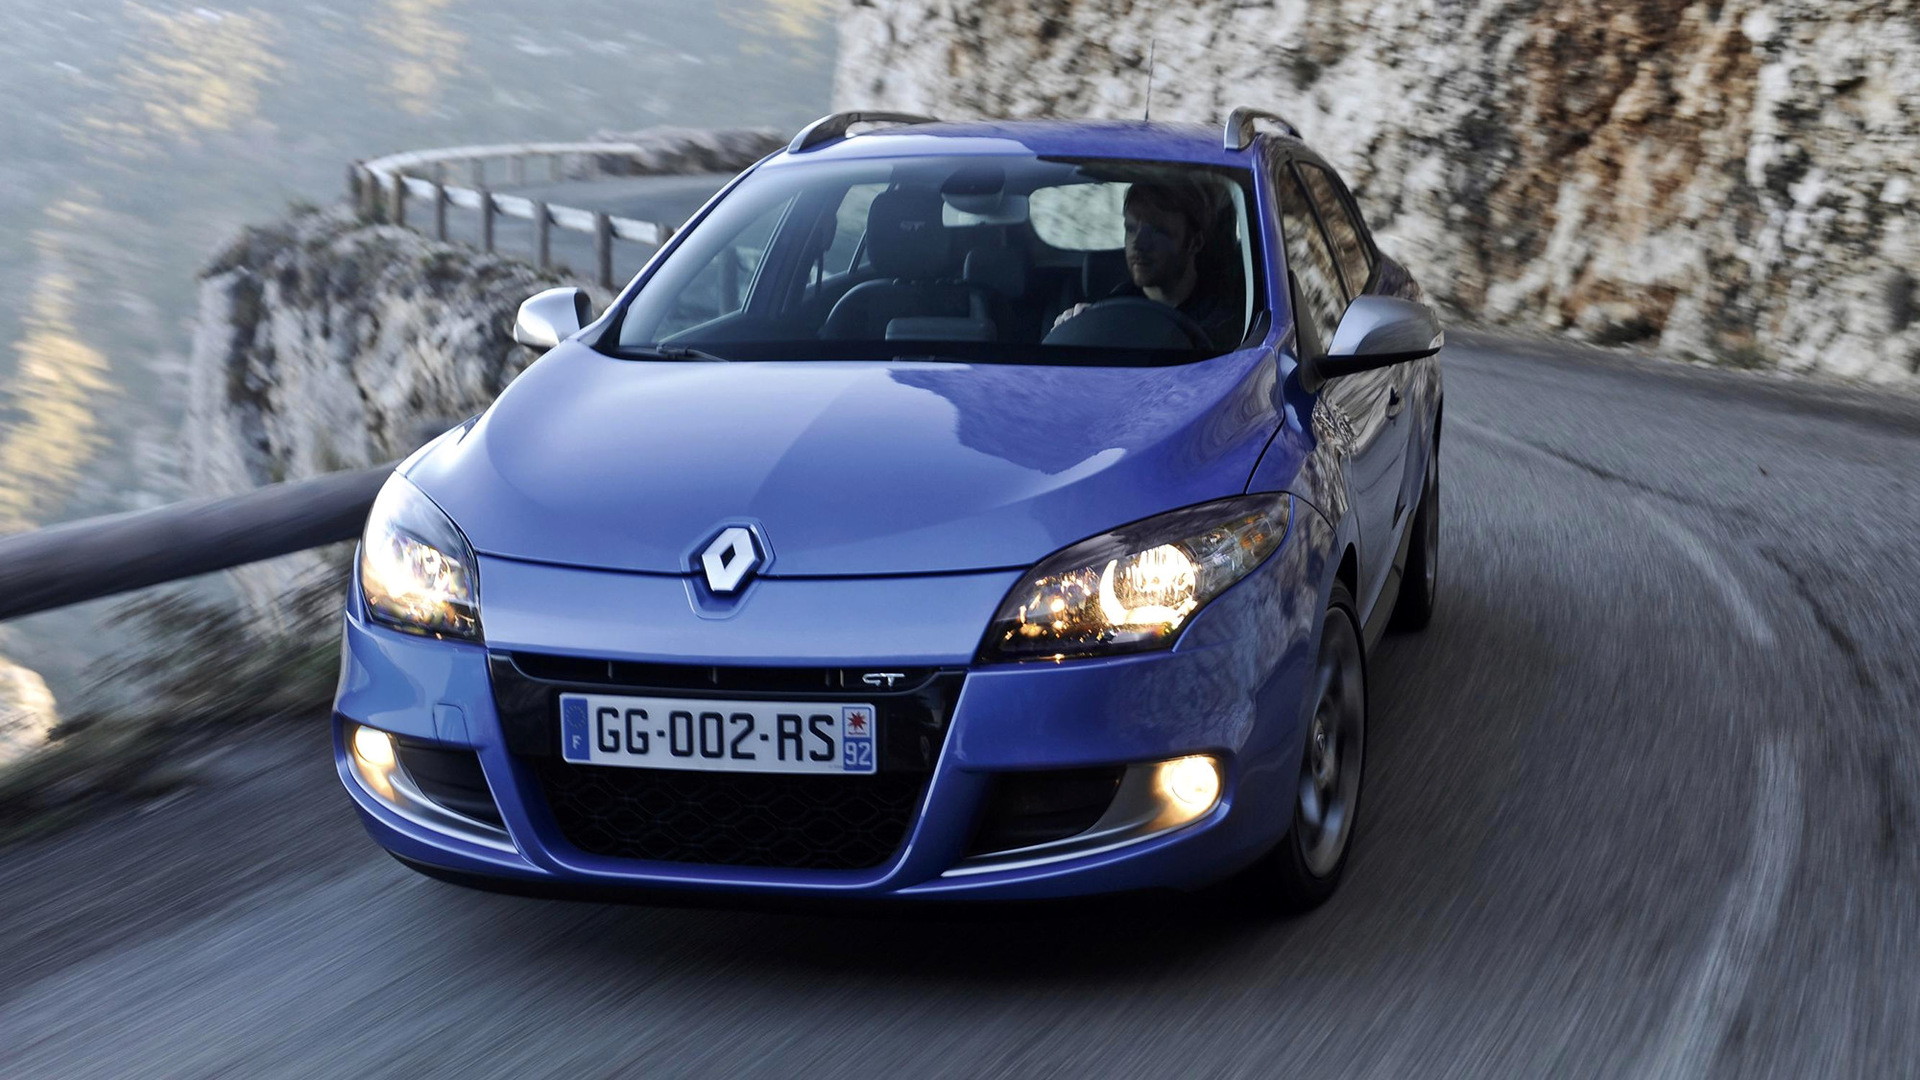 Conceit interferentie Pech 2010 Renault Megane GT Estate - Wallpapers and HD Images | Car Pixel